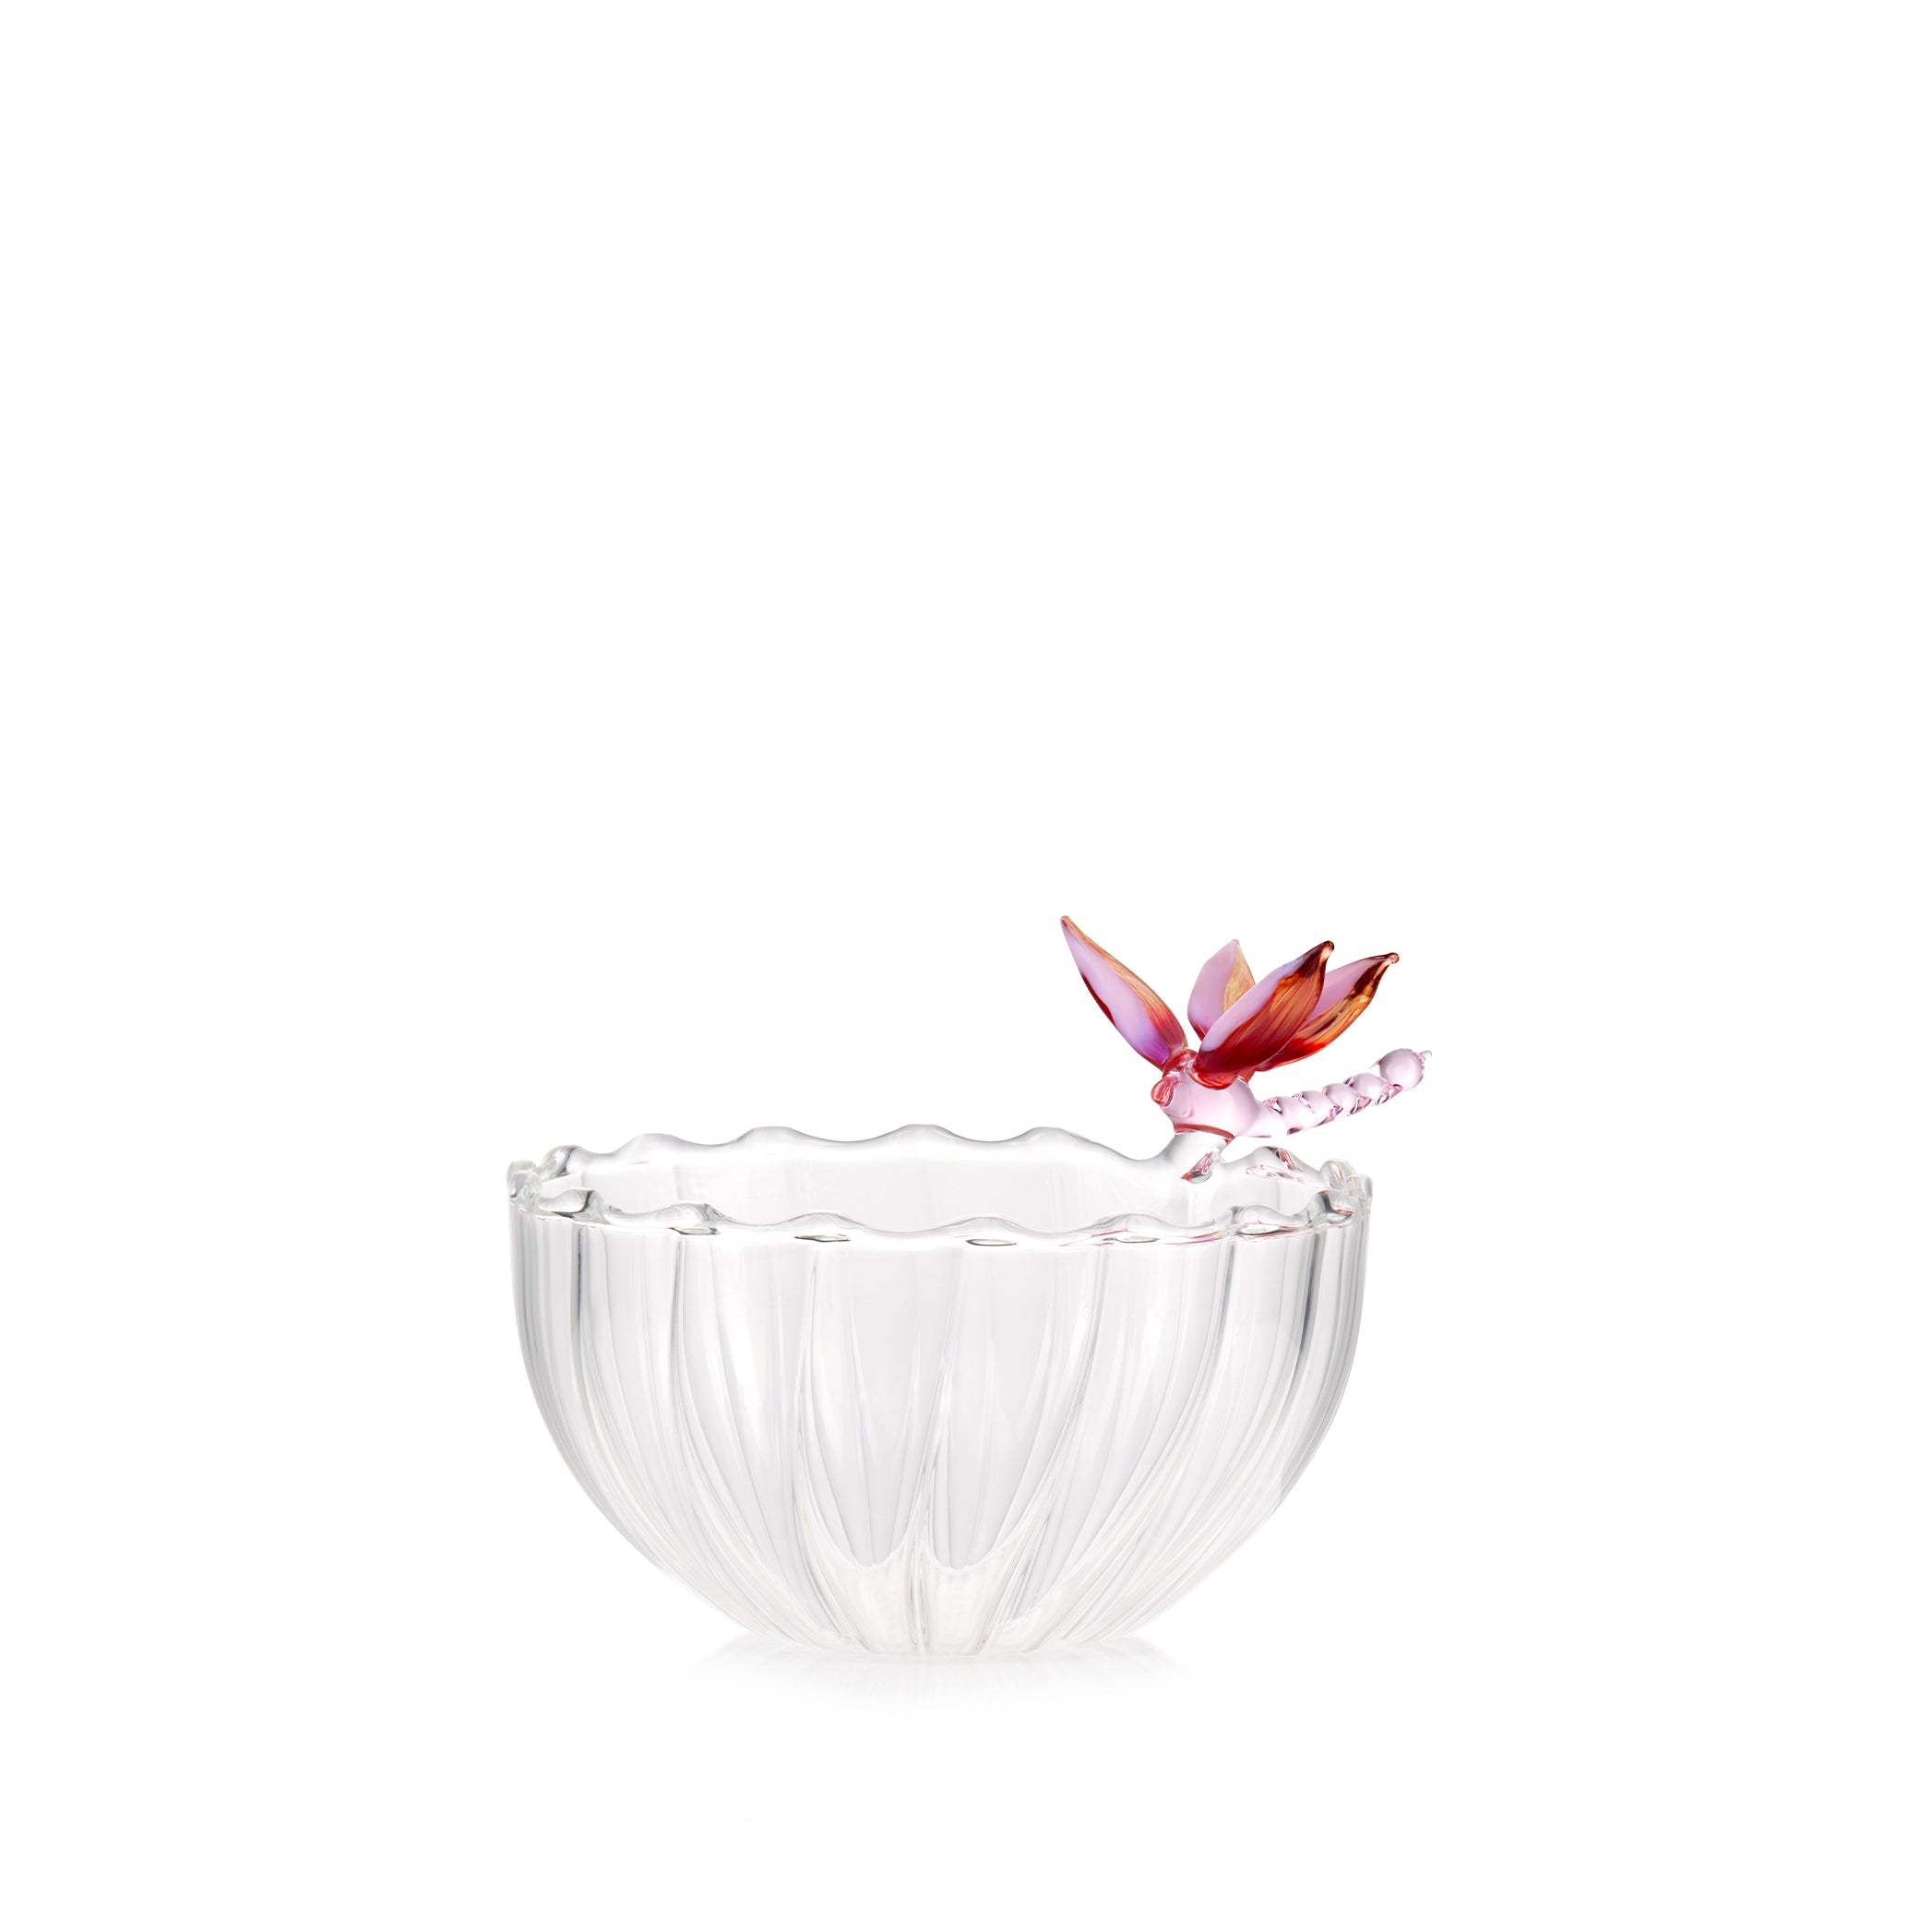 S&B Exclusive Handblown Glass Dragonfly Bowl in Pink